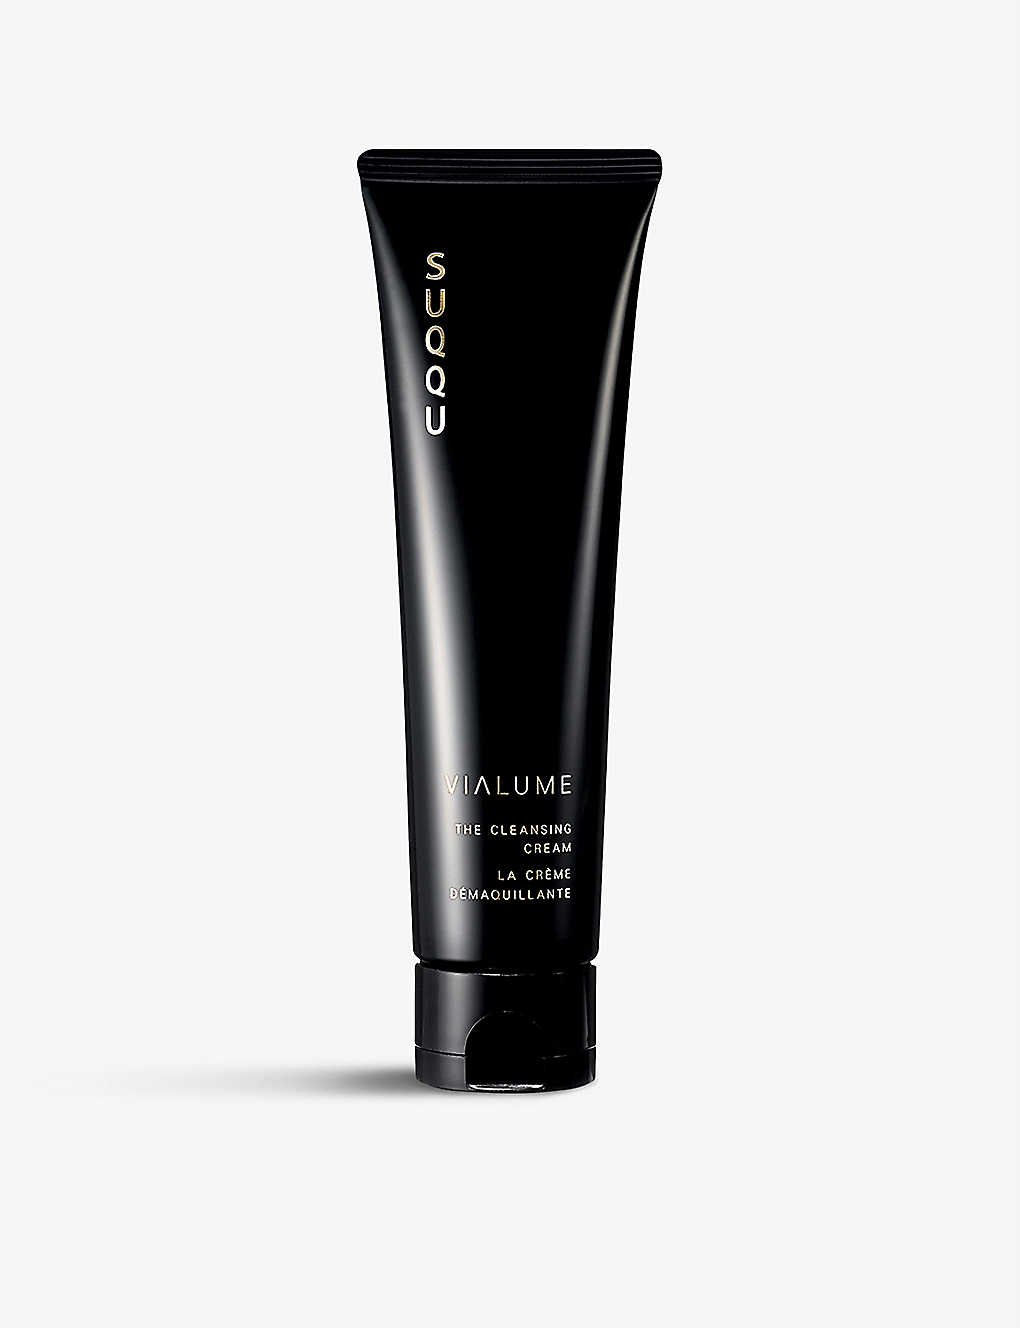 Suqqu Vialume The Cleansing Limited-edition Cream 125g